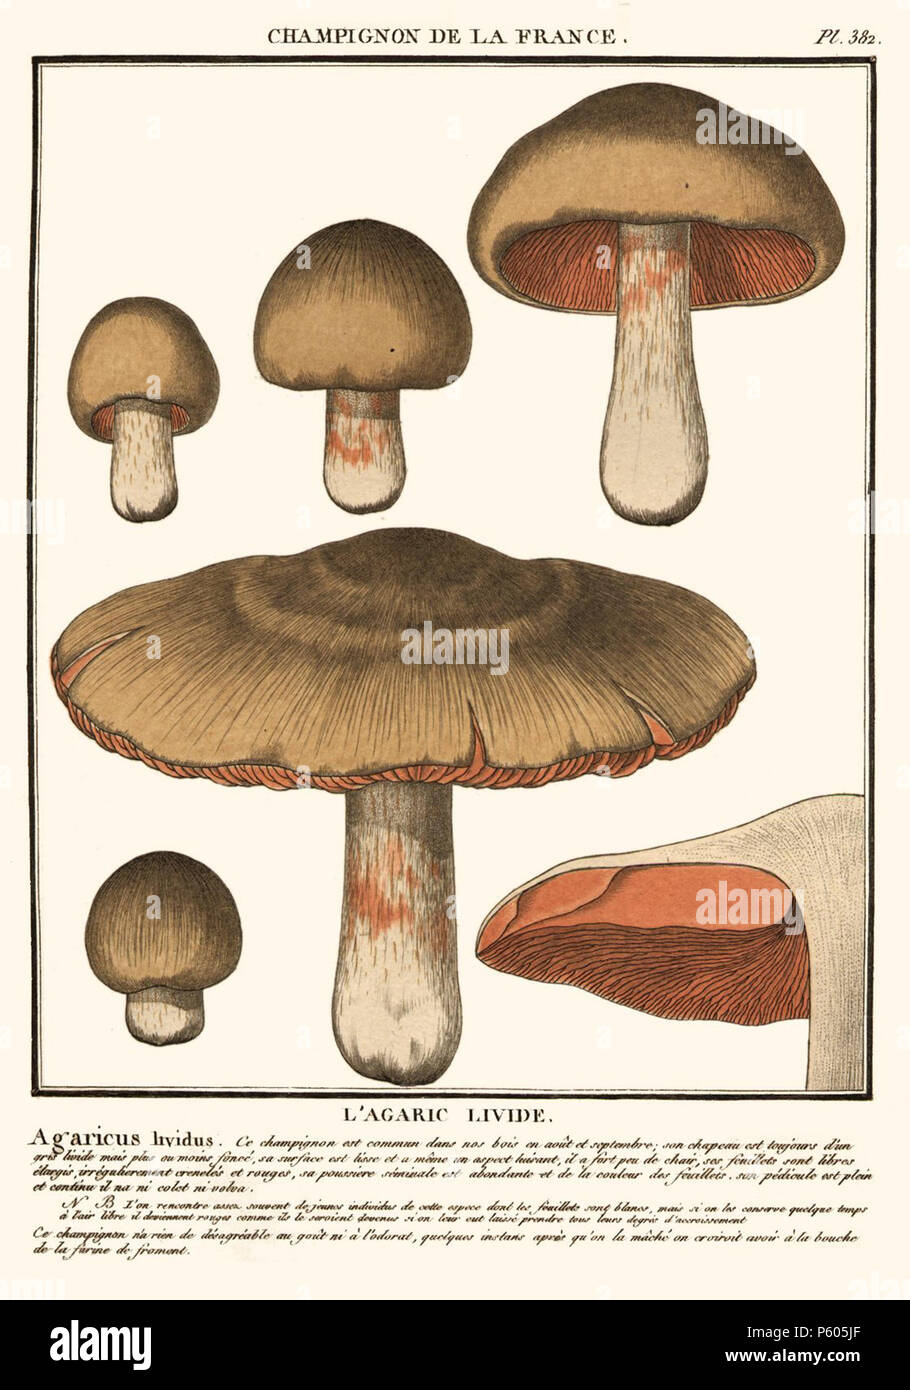 N/A. English: Illustration of the mushroom Agaricus lividus Bull., which would later become known as Entoloma sinuatum (Bull.) P.Kumm. 1788. Jean Baptiste Bulliard 519 Entoloma sinuatum by Bulliard 1788 plate 382 Stock Photo